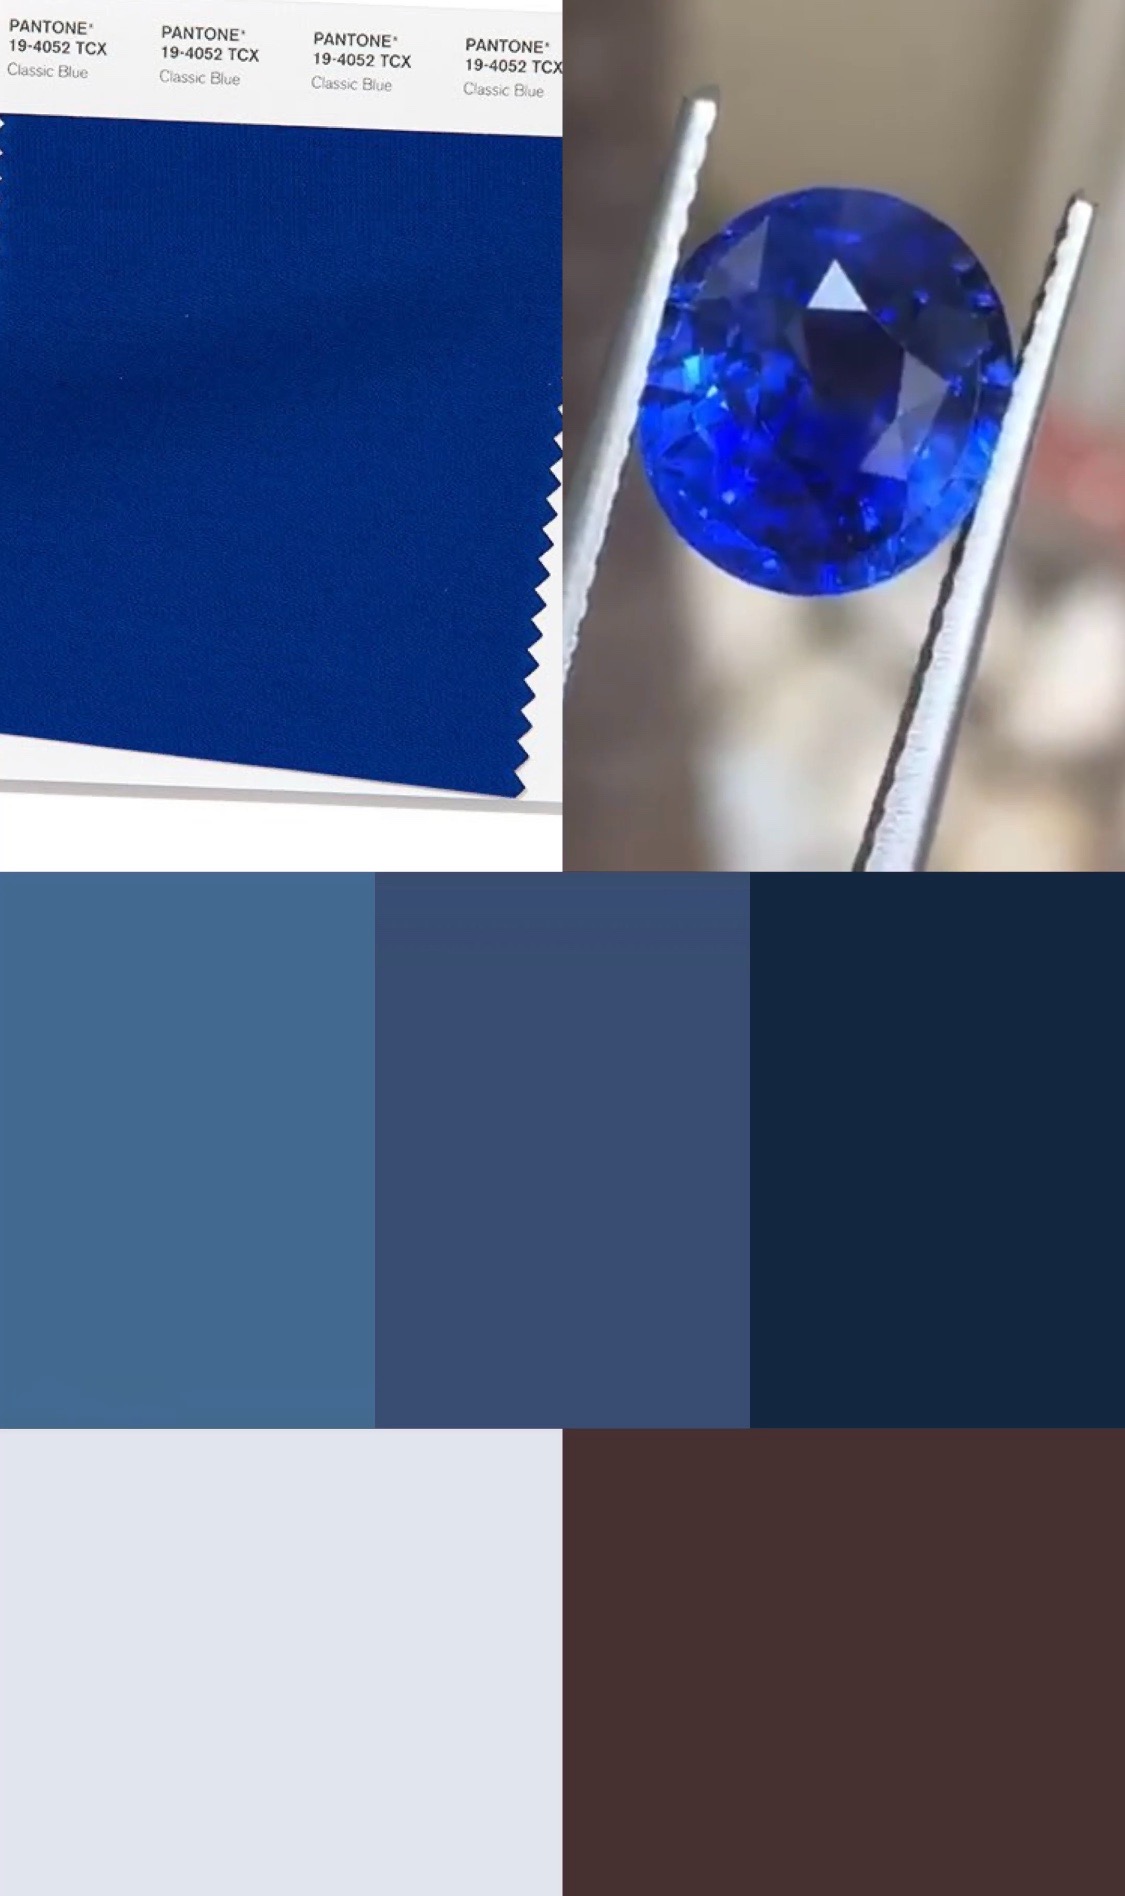 Top 12 Most Fashionable Pantone Color Combinations Spring- Summer 2020